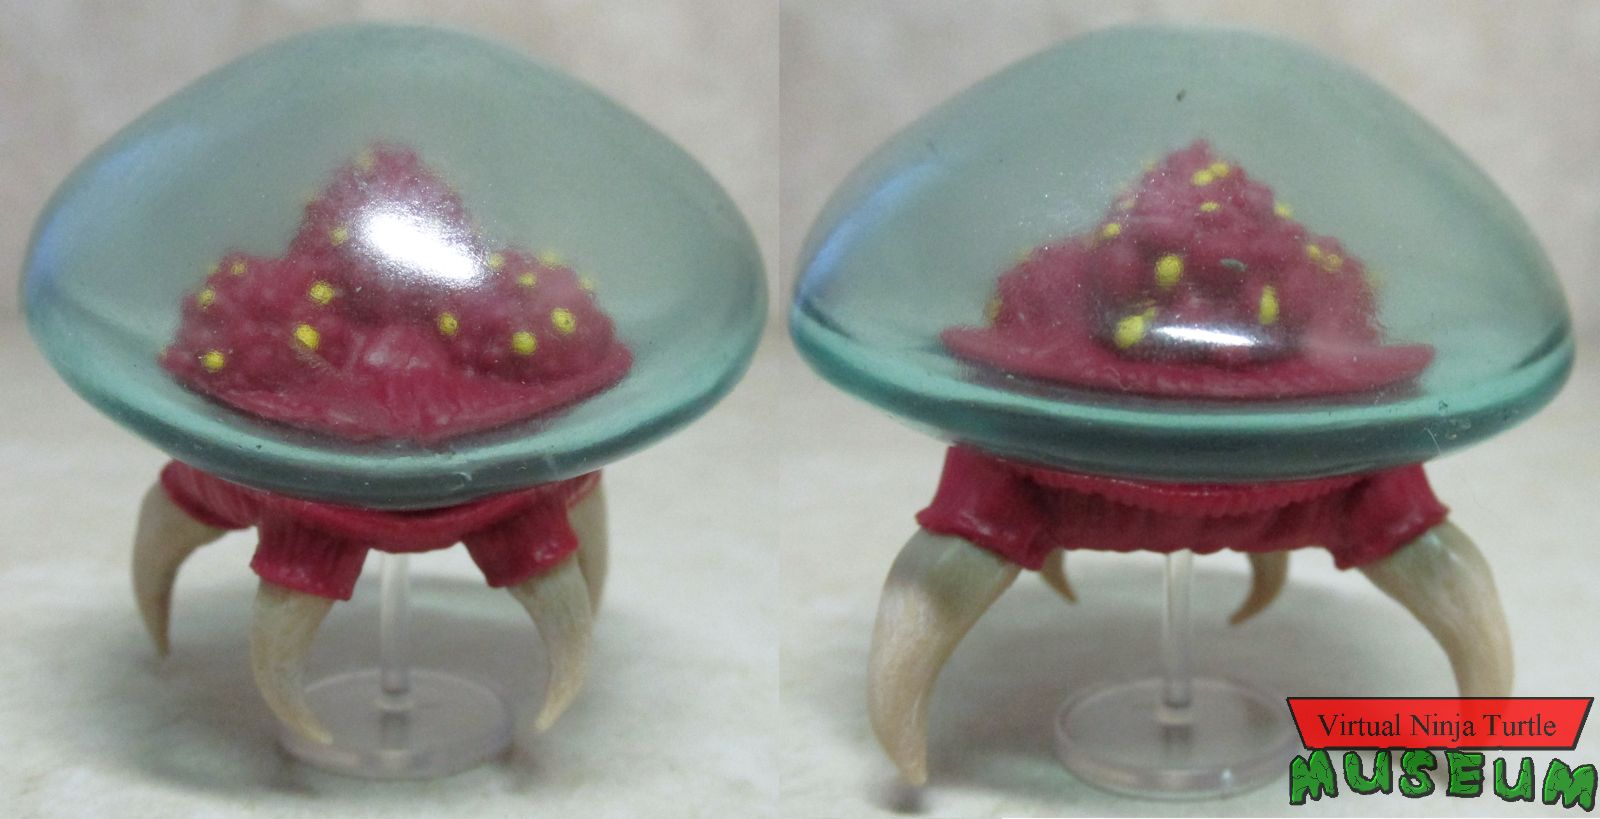 Metroid front and back